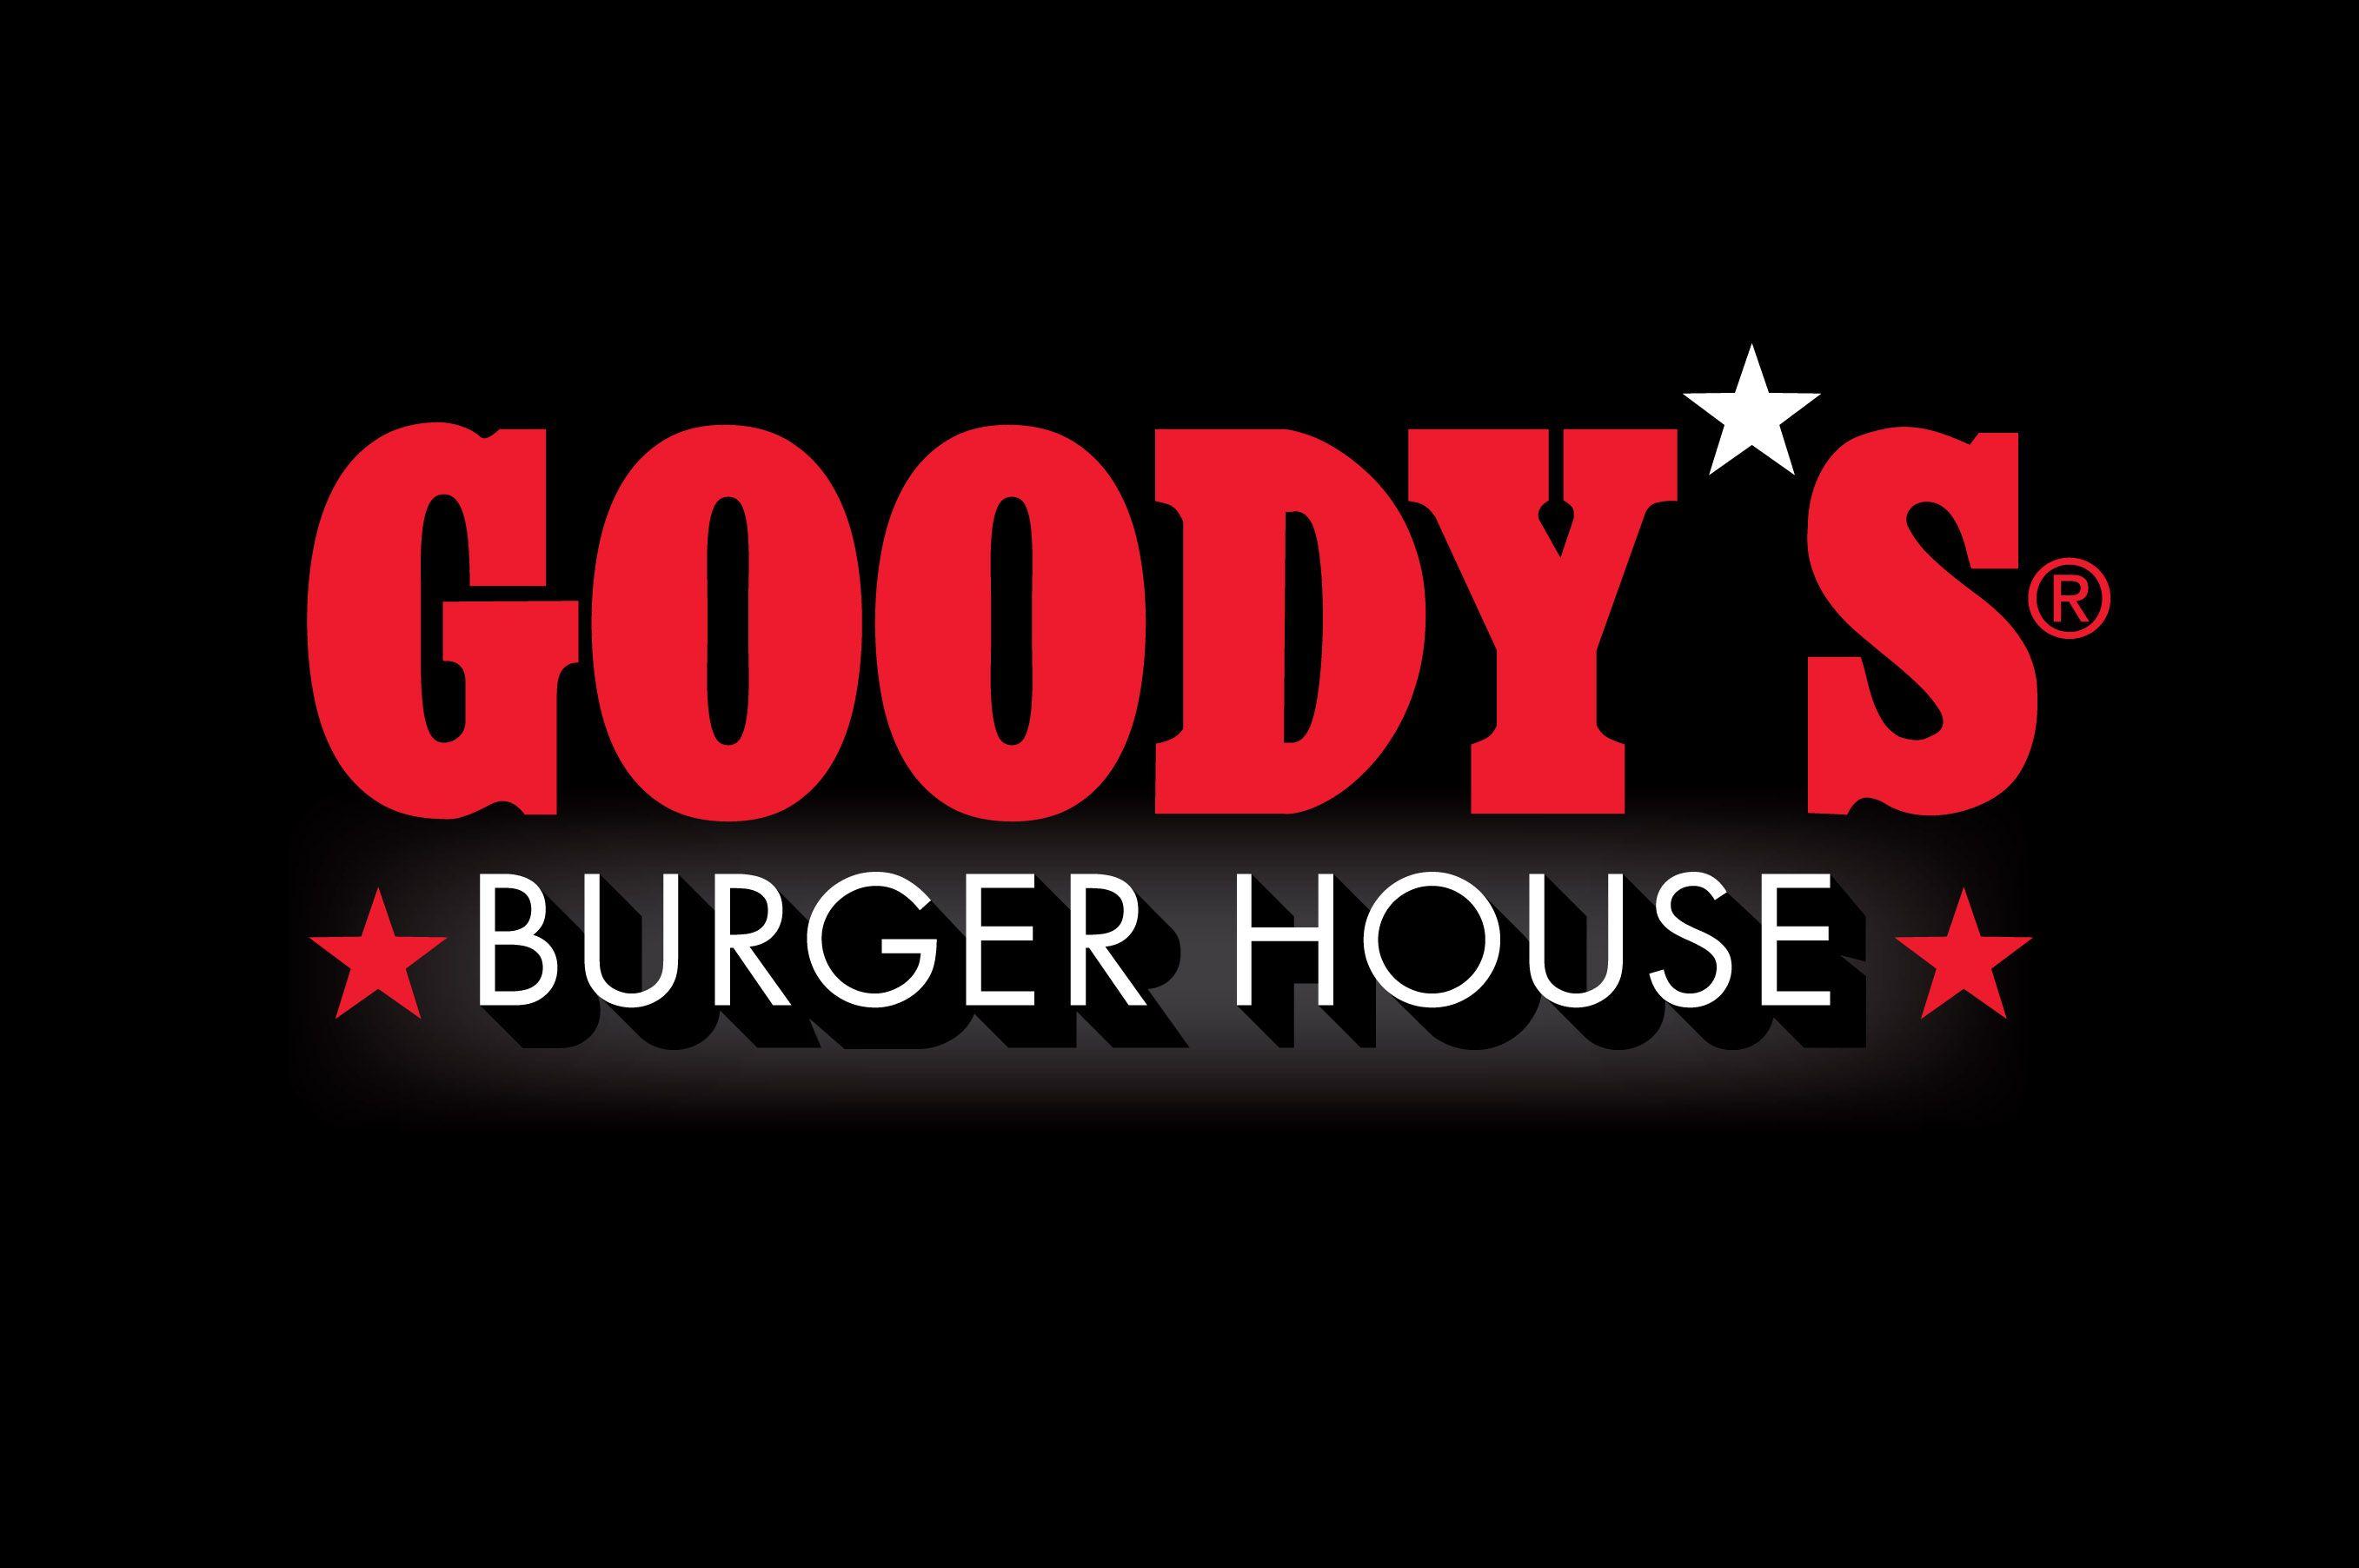 All Burger Places Logo - HOME. GOODY'S BURGER HOUSE